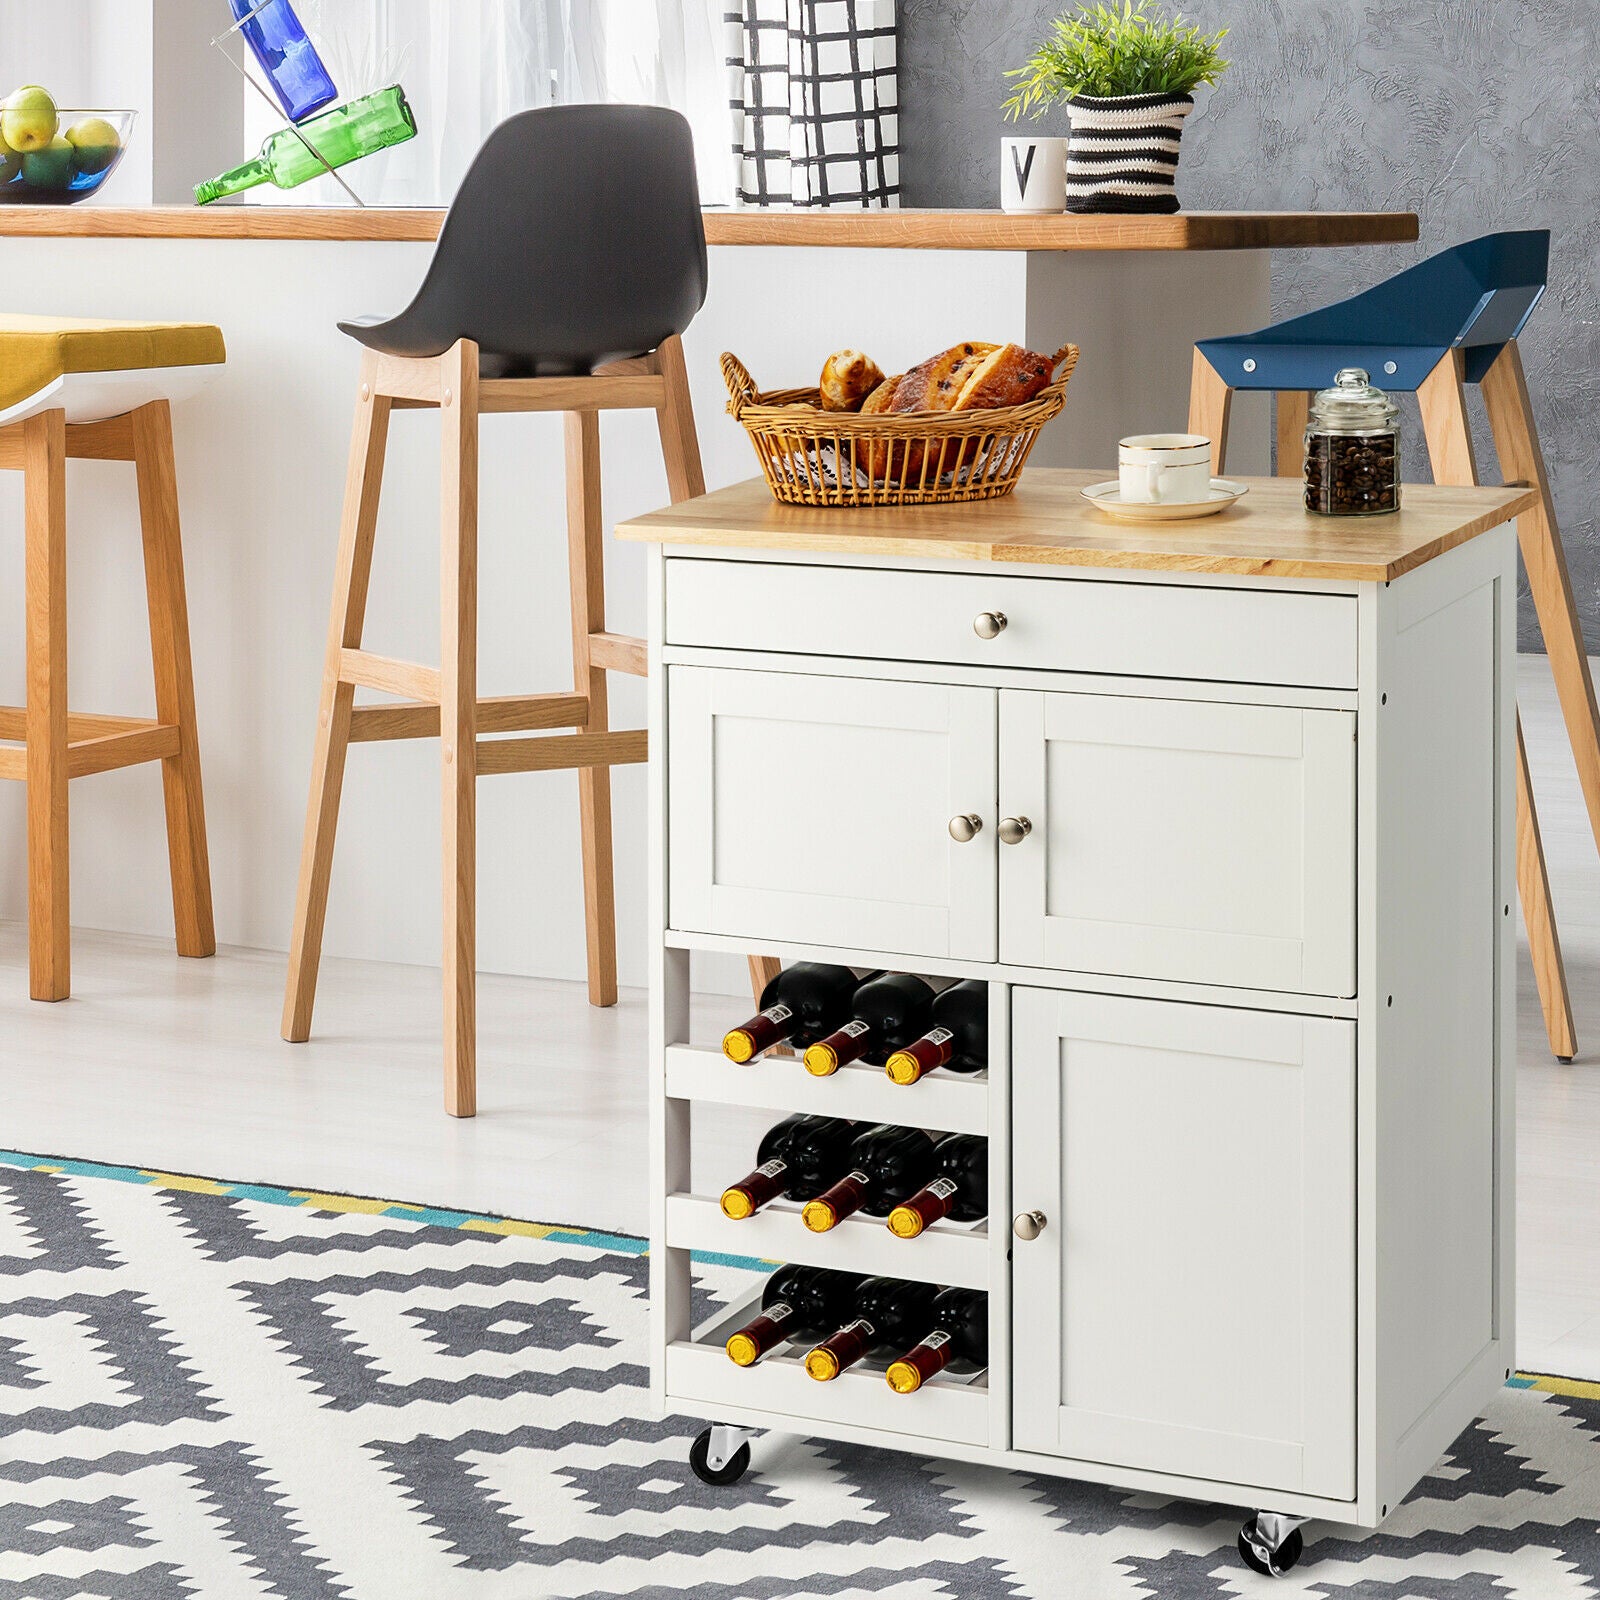 Rolling Kitchen Cart with 3 Tier Wine Racks and Cupboards White